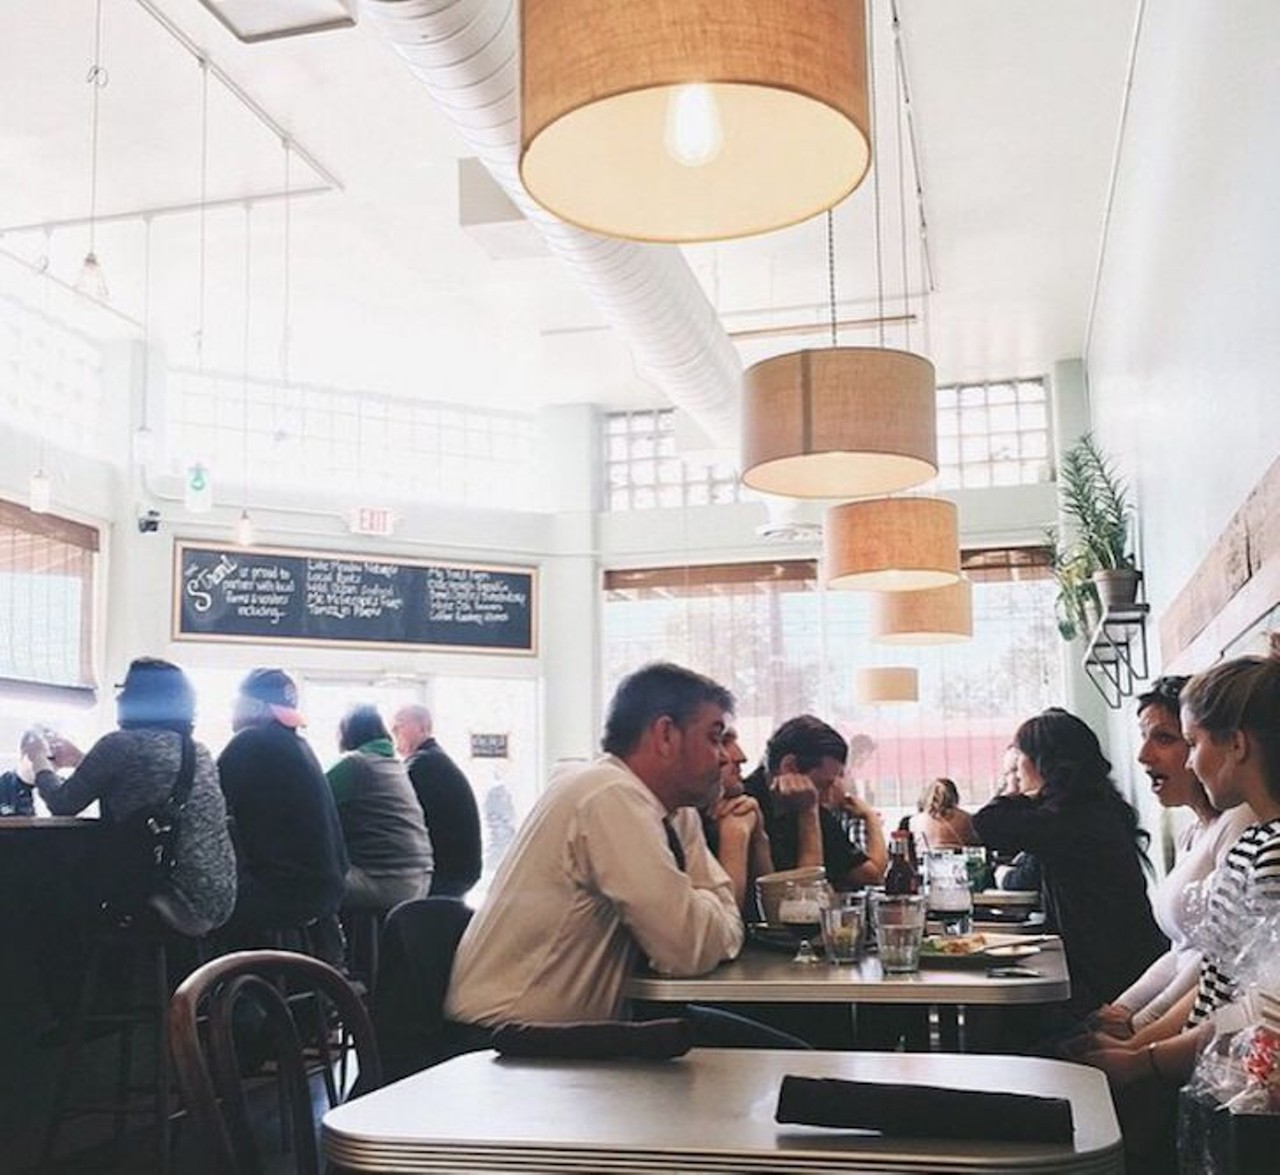 The Strand 
807 N. Mills Ave., 407-920-7744
Classic fare with a Southern twist is what The Strand stitches together for their Saturday brunch. Try a brunch burger featuring a sunny-side-up egg or huevos rancheros, to put a Mexican spin on the morning.
Photo via The Strand/Instagram